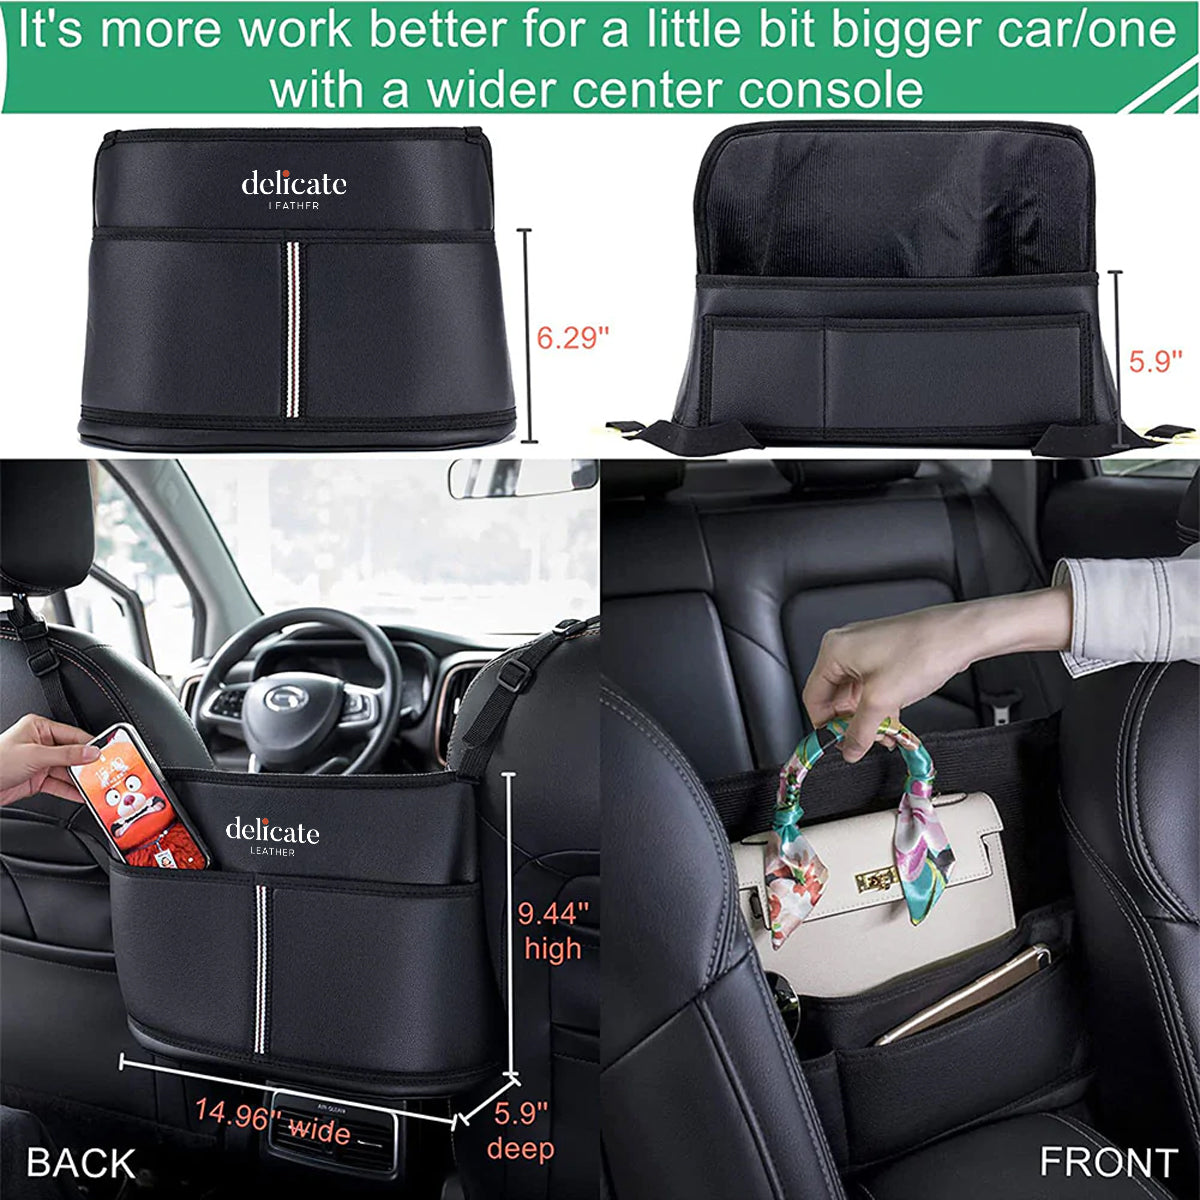 Delicate Leather Car Purse Holder for Car Handbag Holder Between Seats Premium PU Leather, Custom Fit For Your Cars, Auto Driver Or Passenger Accessories Organizer, Hanging Car Purse Storage Pocket Back Seat Pet Barrier CA11991 - Delicate Leather